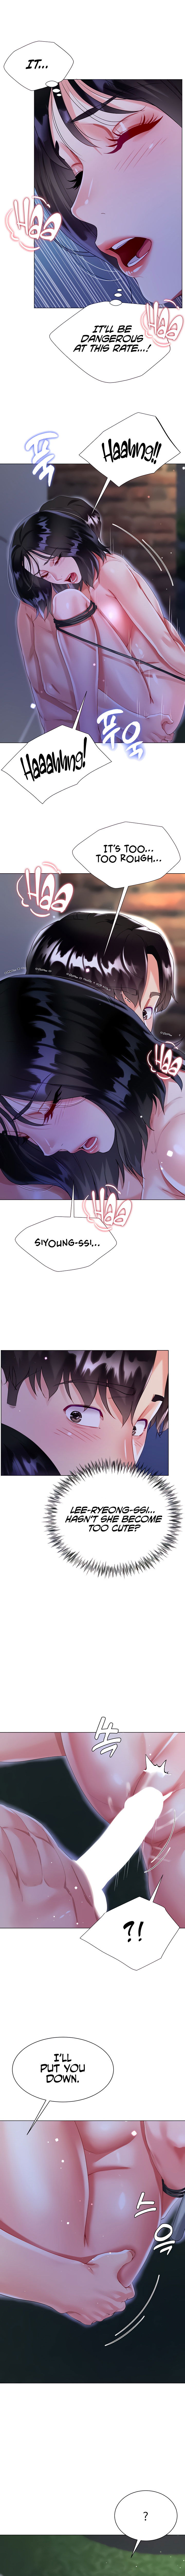 my-sister-in-laws-skirt-chap-36-5